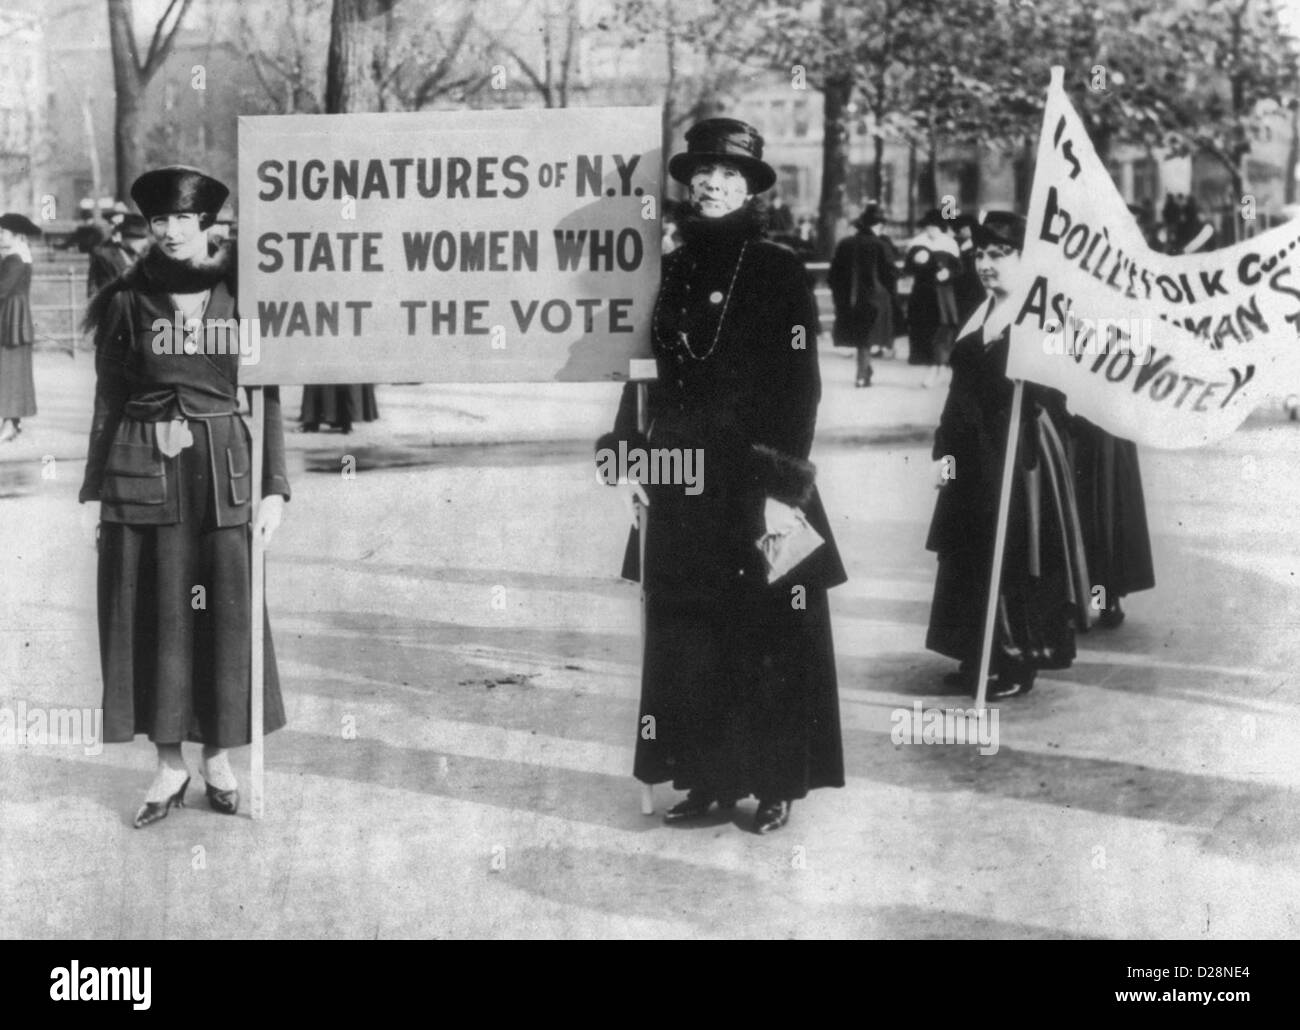 Suffragettes - U.S.: Audre Osborne and Mrs. James S. Stevens, with several others in background,  holding signs, 1917 Stock Photo